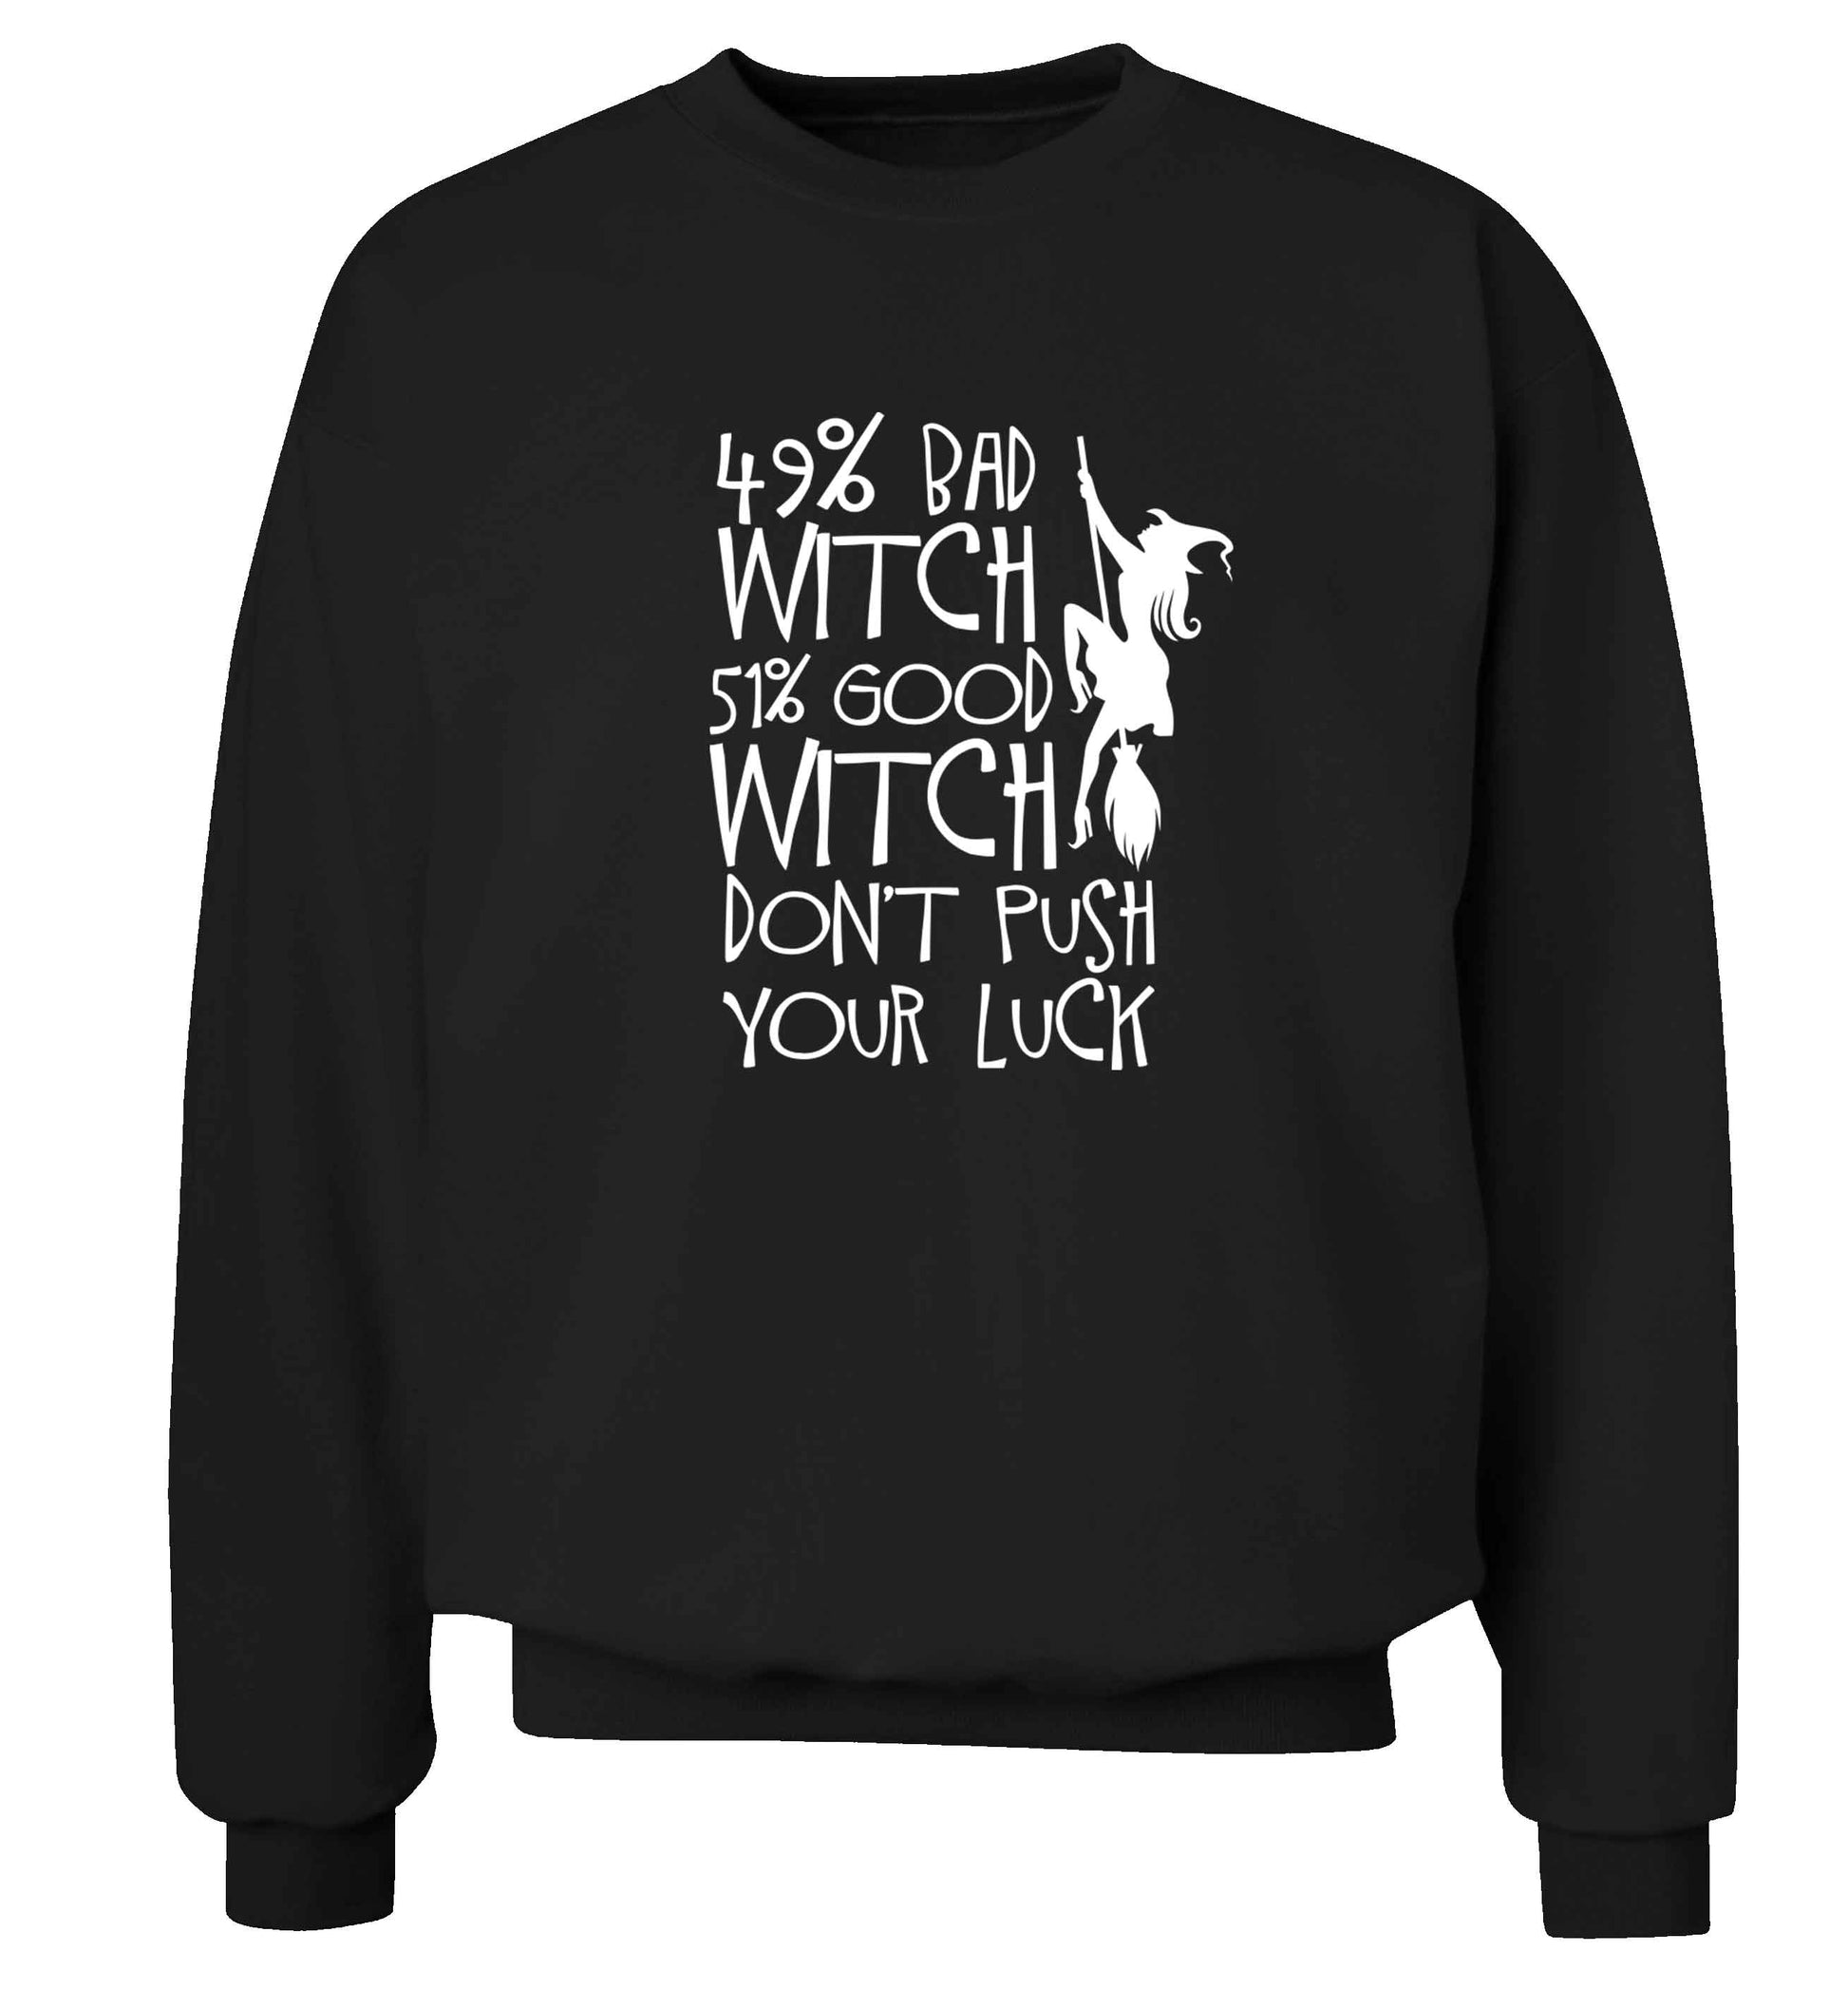 49% bad witch 51% good witch don't push your luck adult's unisex black sweater 2XL